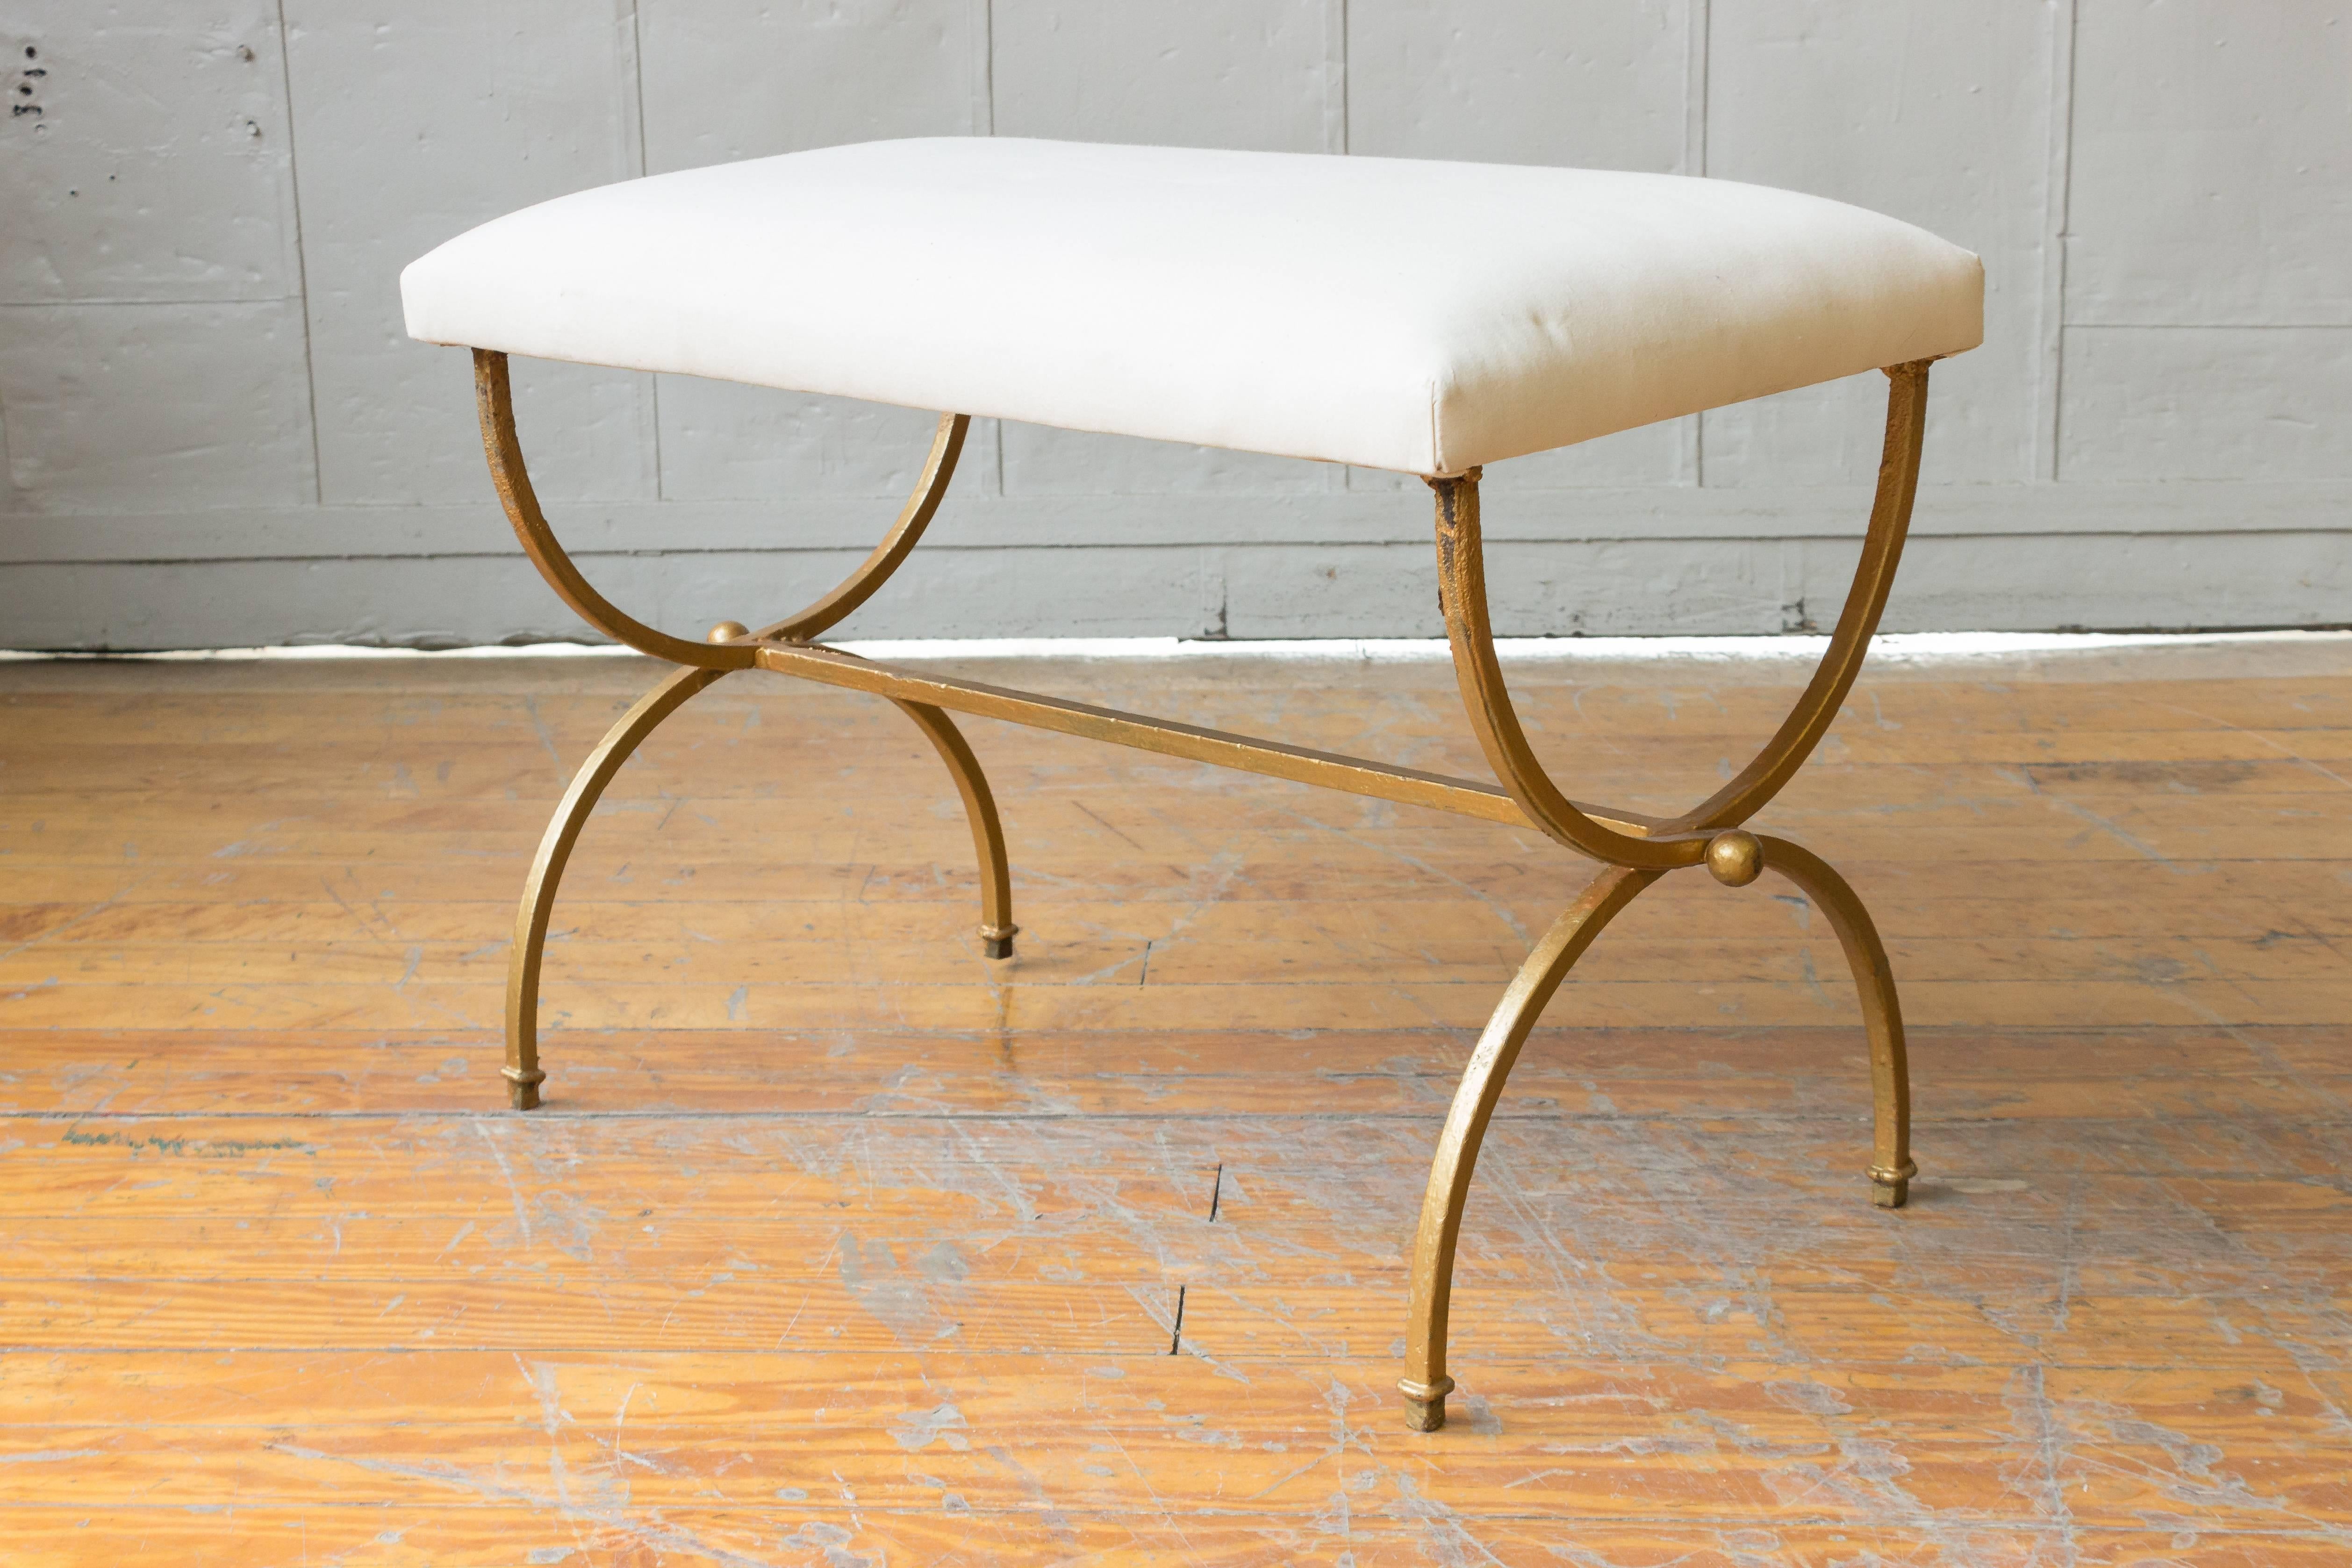 Pair of elegant gilt iron benches upholstered in white muslin. 3 benches are available. Spanish, 1950s.